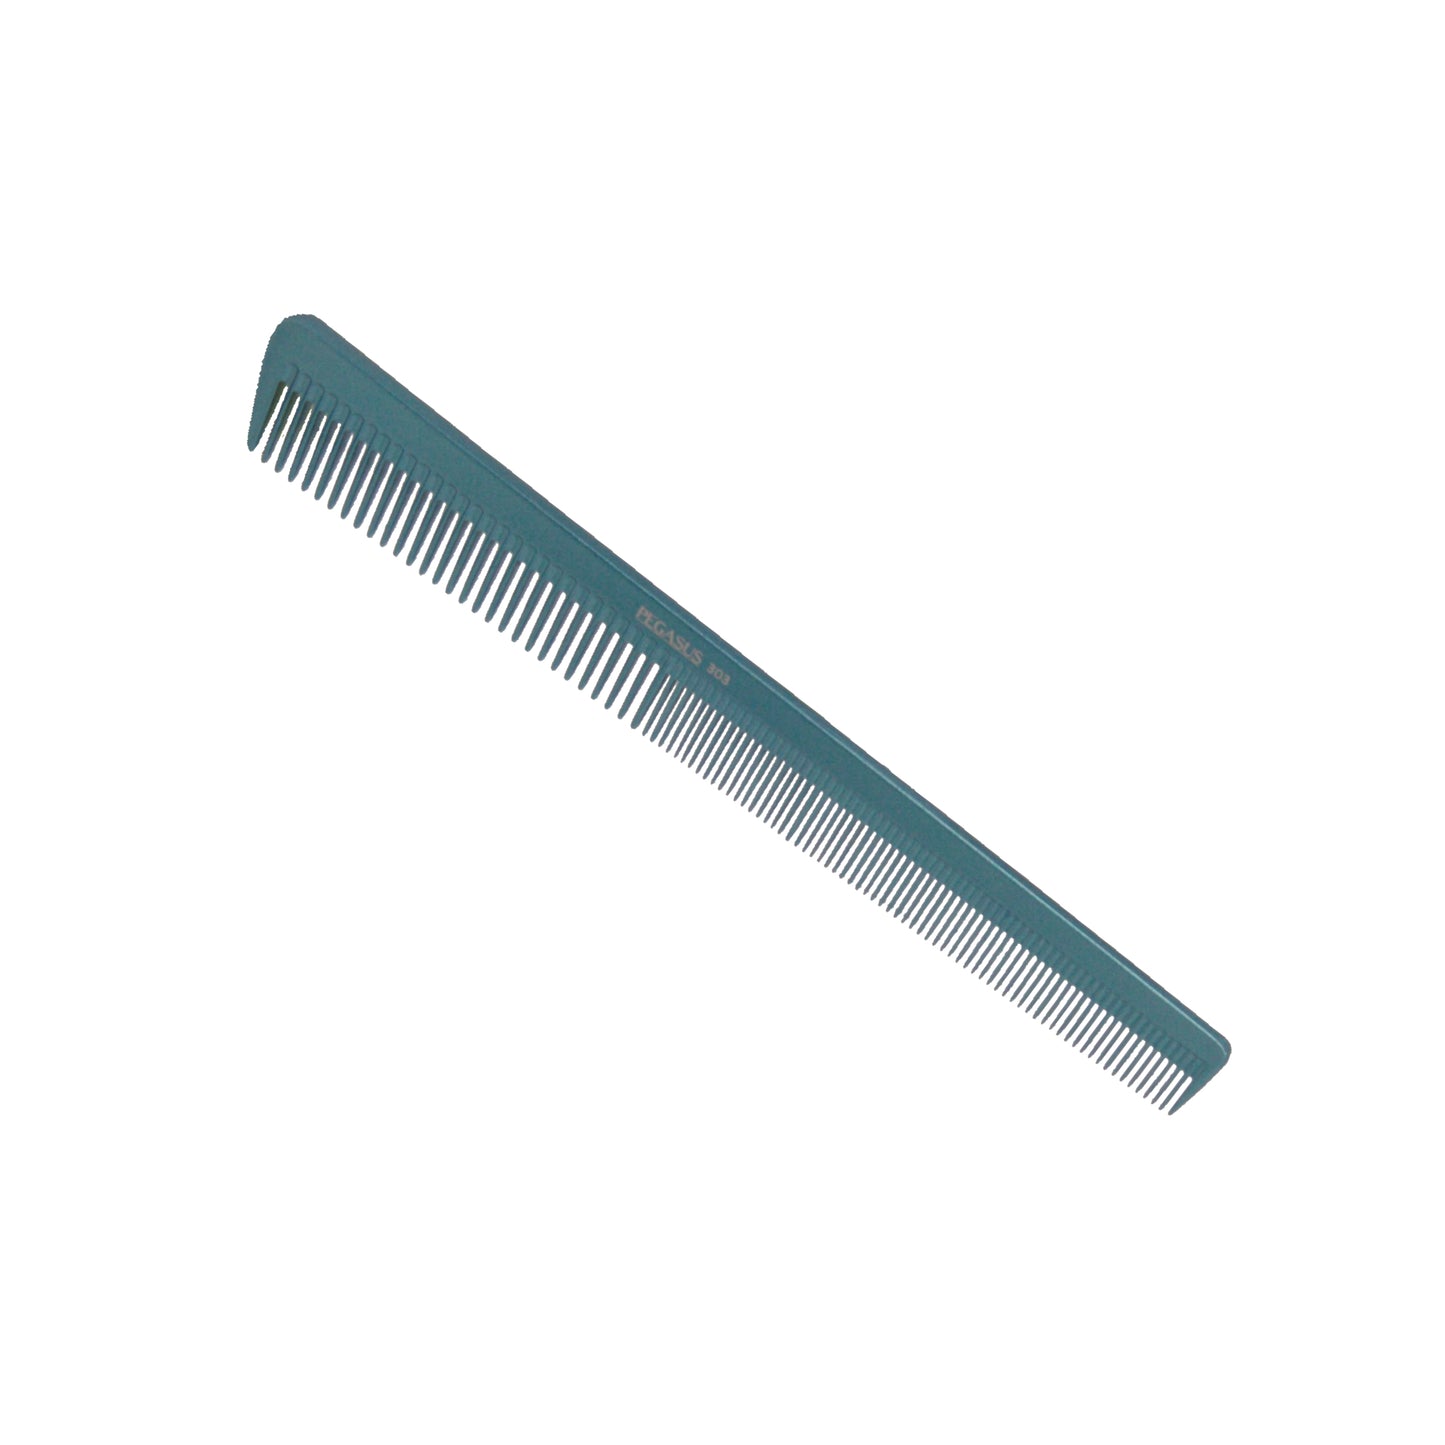 Pegasus MICOLOR 303, 6.5in Hard Rubber Heavy Barber Comb, Handmade, Seamless, Smooth Edges, Anti Static, Heat and Chemically Resistant, Wet Hair, Everyday Grooming Comb | Peines de goma dura - Green